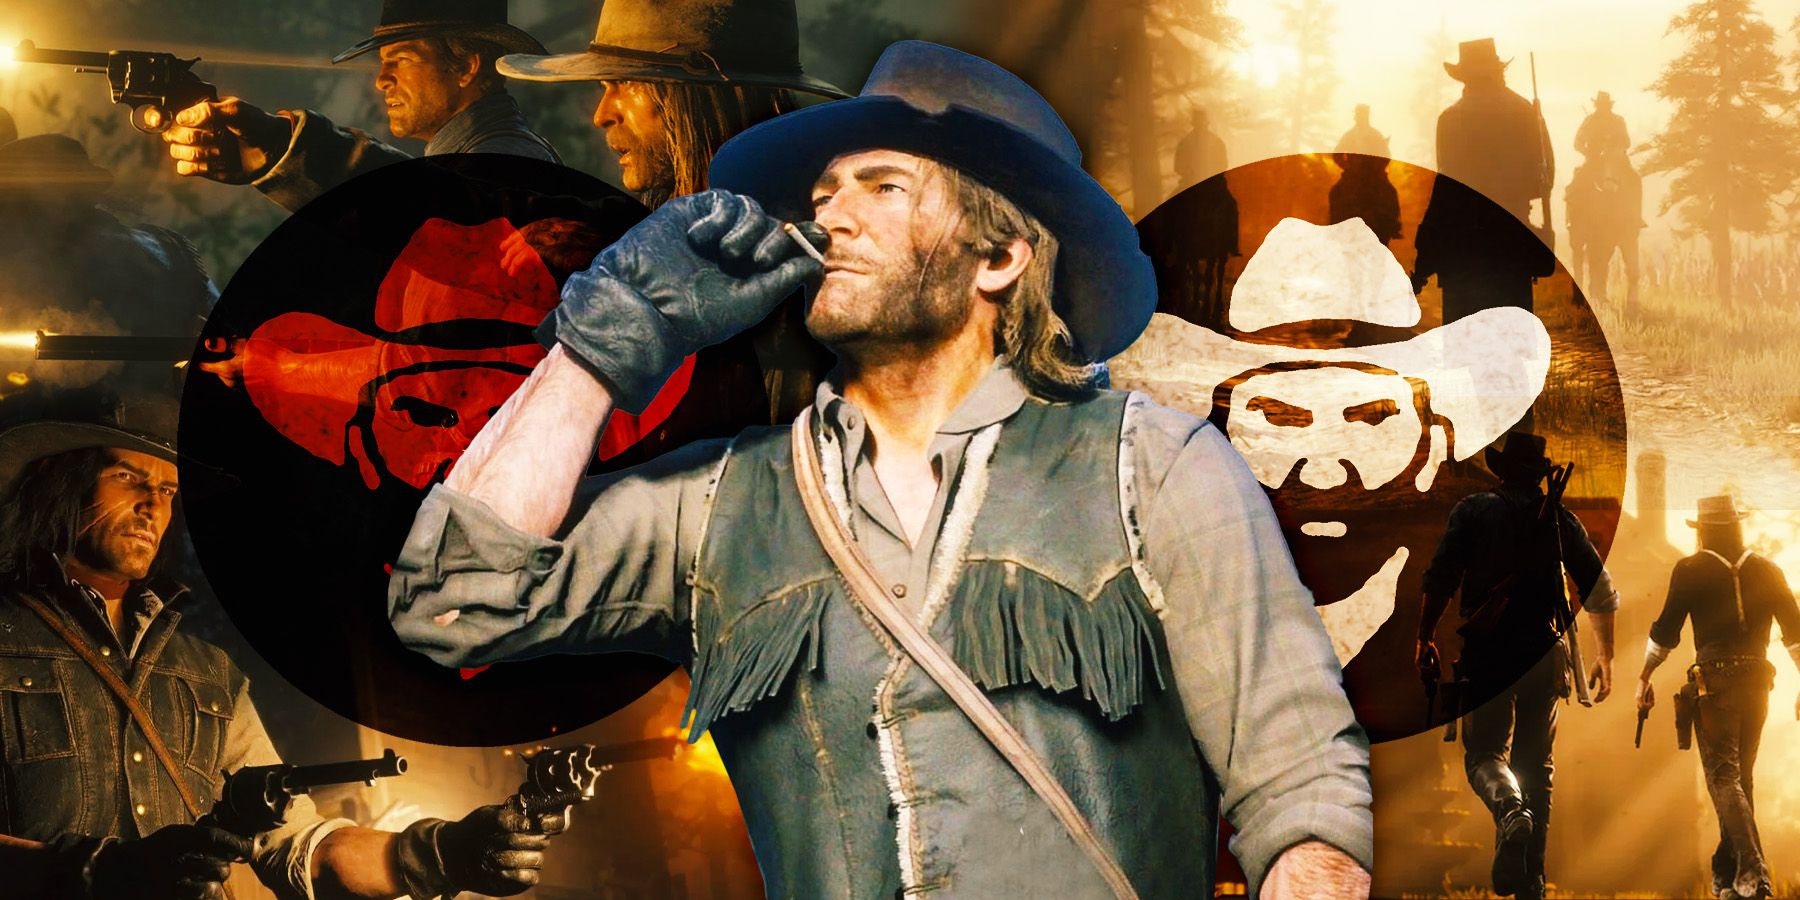 Arthur Morgan from RDR2 with the High Honor and Low Honor symbols on either side of him.